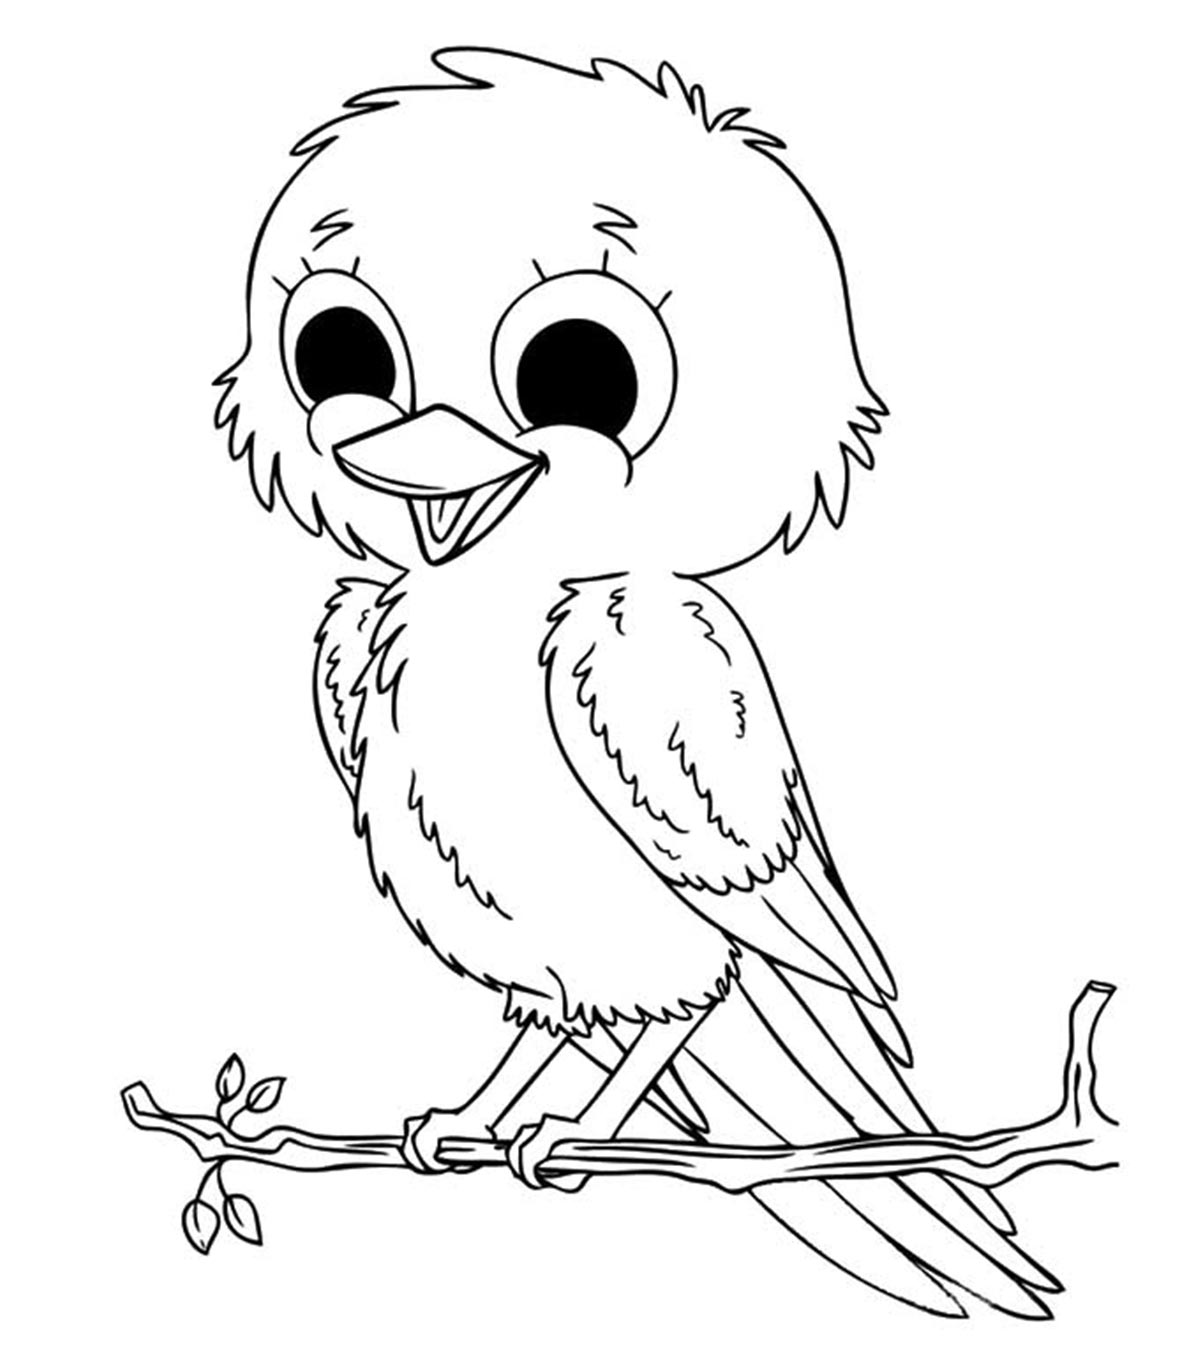 Top 20 Bird Coloring Pages Your Toddler Will Love To Color_image